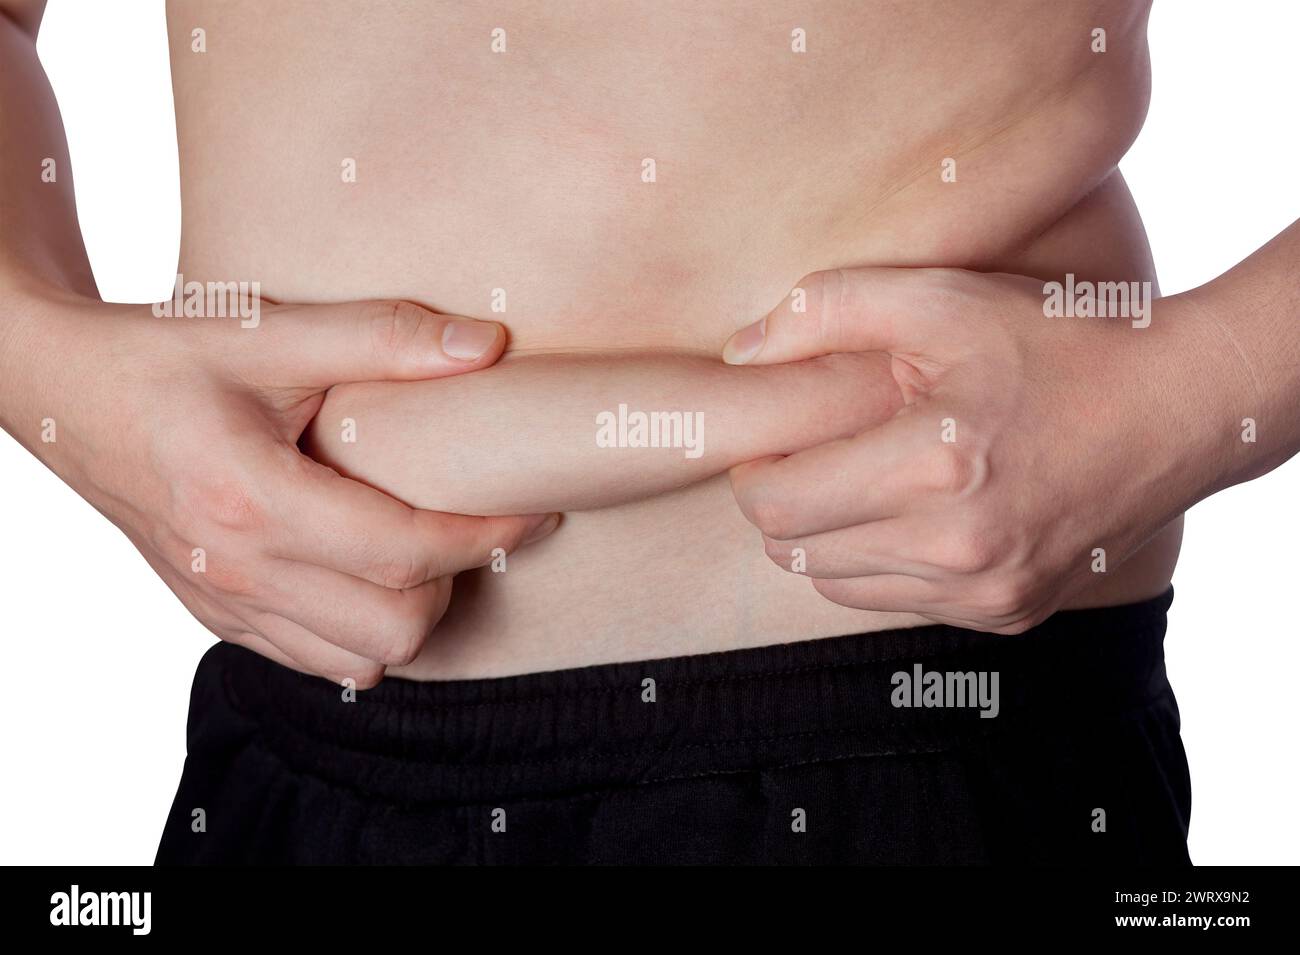 A fat man shows fat deposits on his stomach. Reduction of overweight and obesity treatment. Healthy lifestyle. Stock Photo